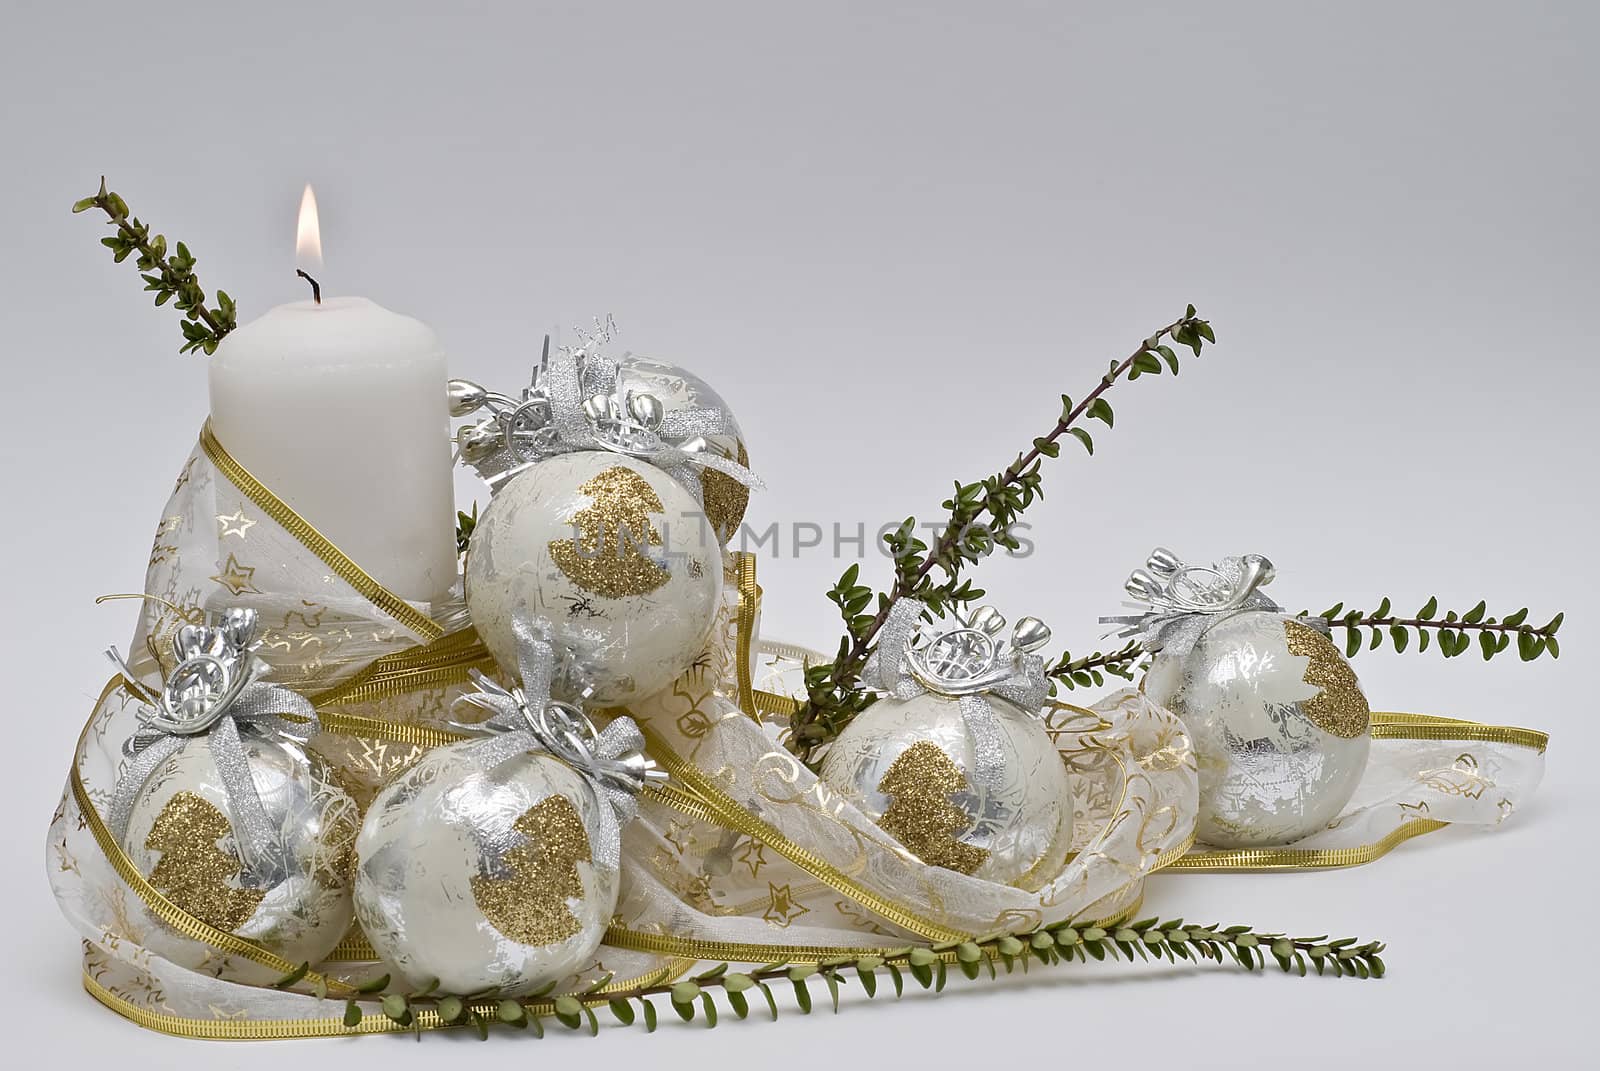 Christmas greetings card with candles.